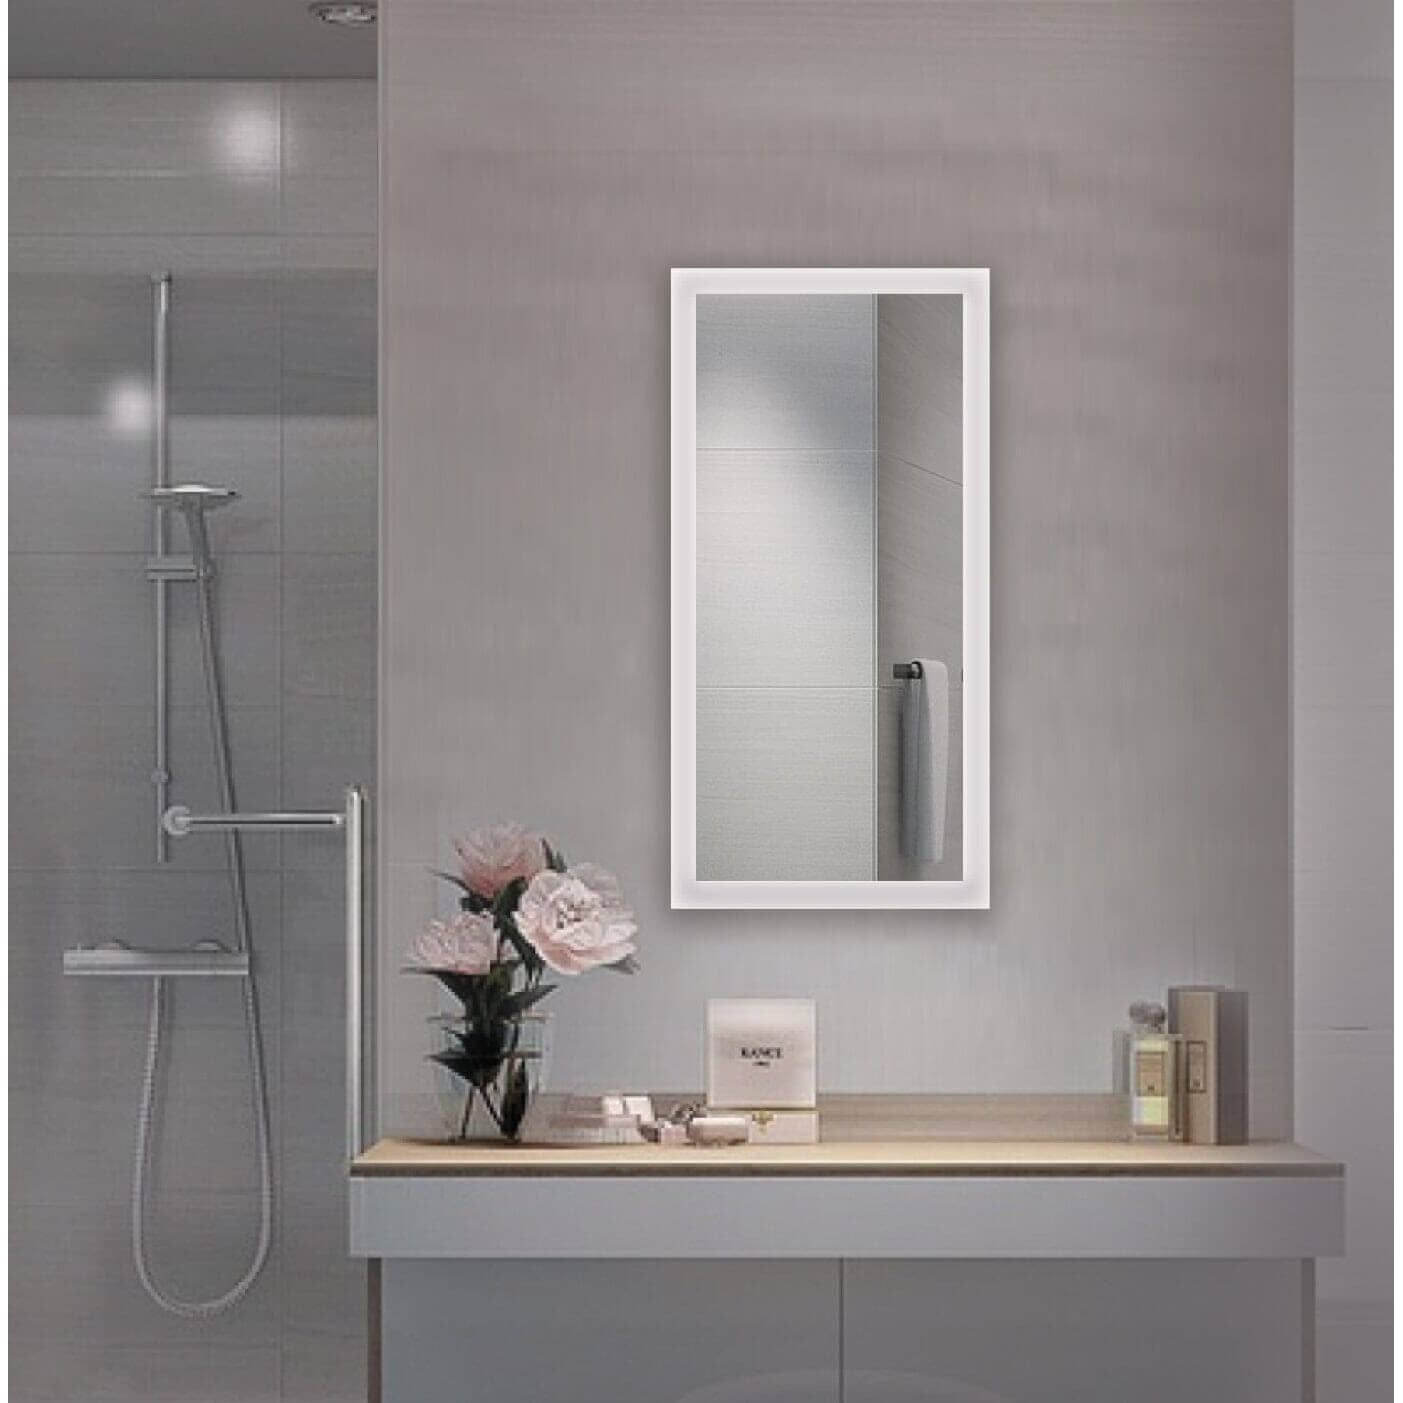 Krugg Bijou 15 x 30 LED mirror in a bathroom with a glass-enclosed shower